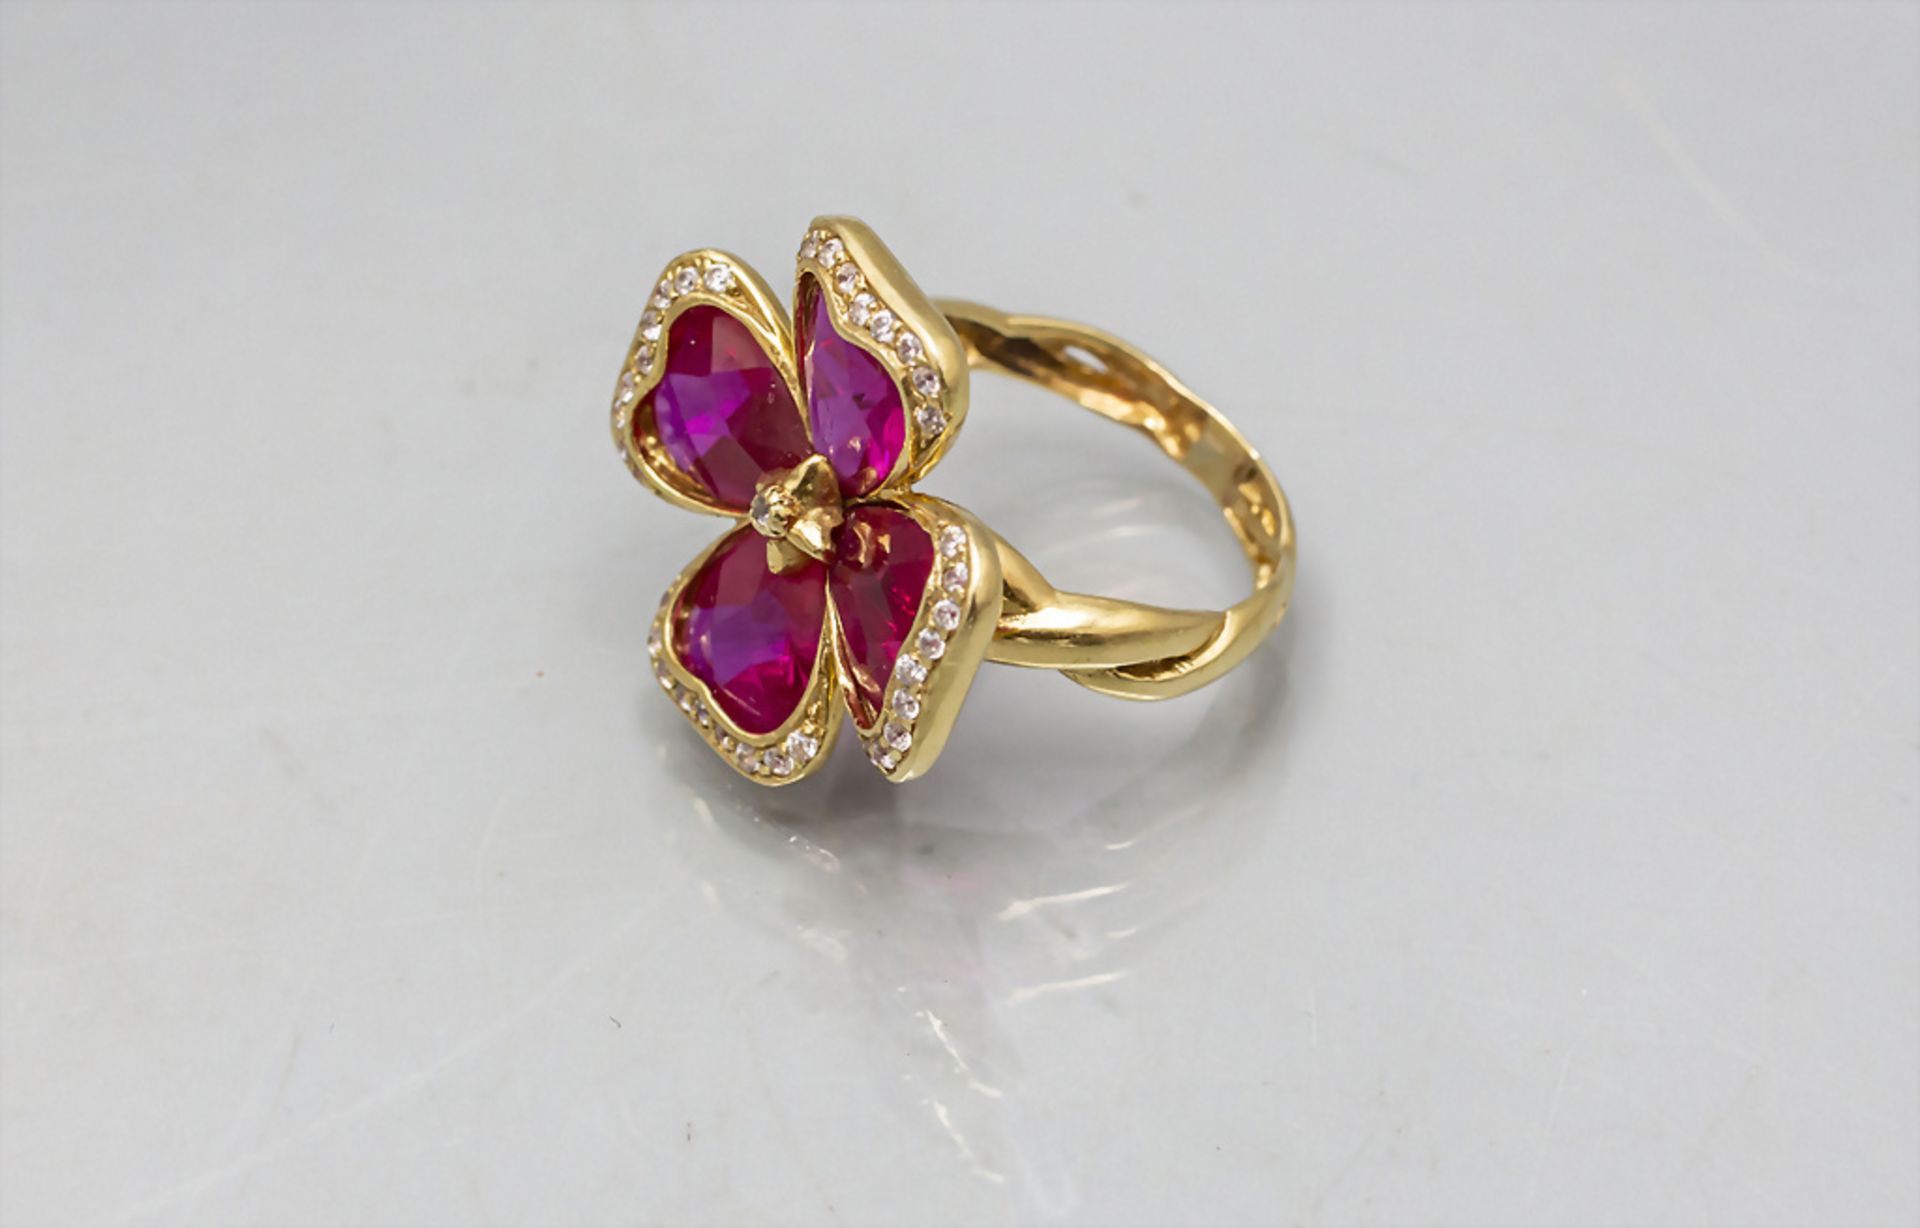 Damenring mit großer Blüte / A ladies 14 ct gold ring with a blossom, 2. Hälfte 20. Jh. - Bild 2 aus 3